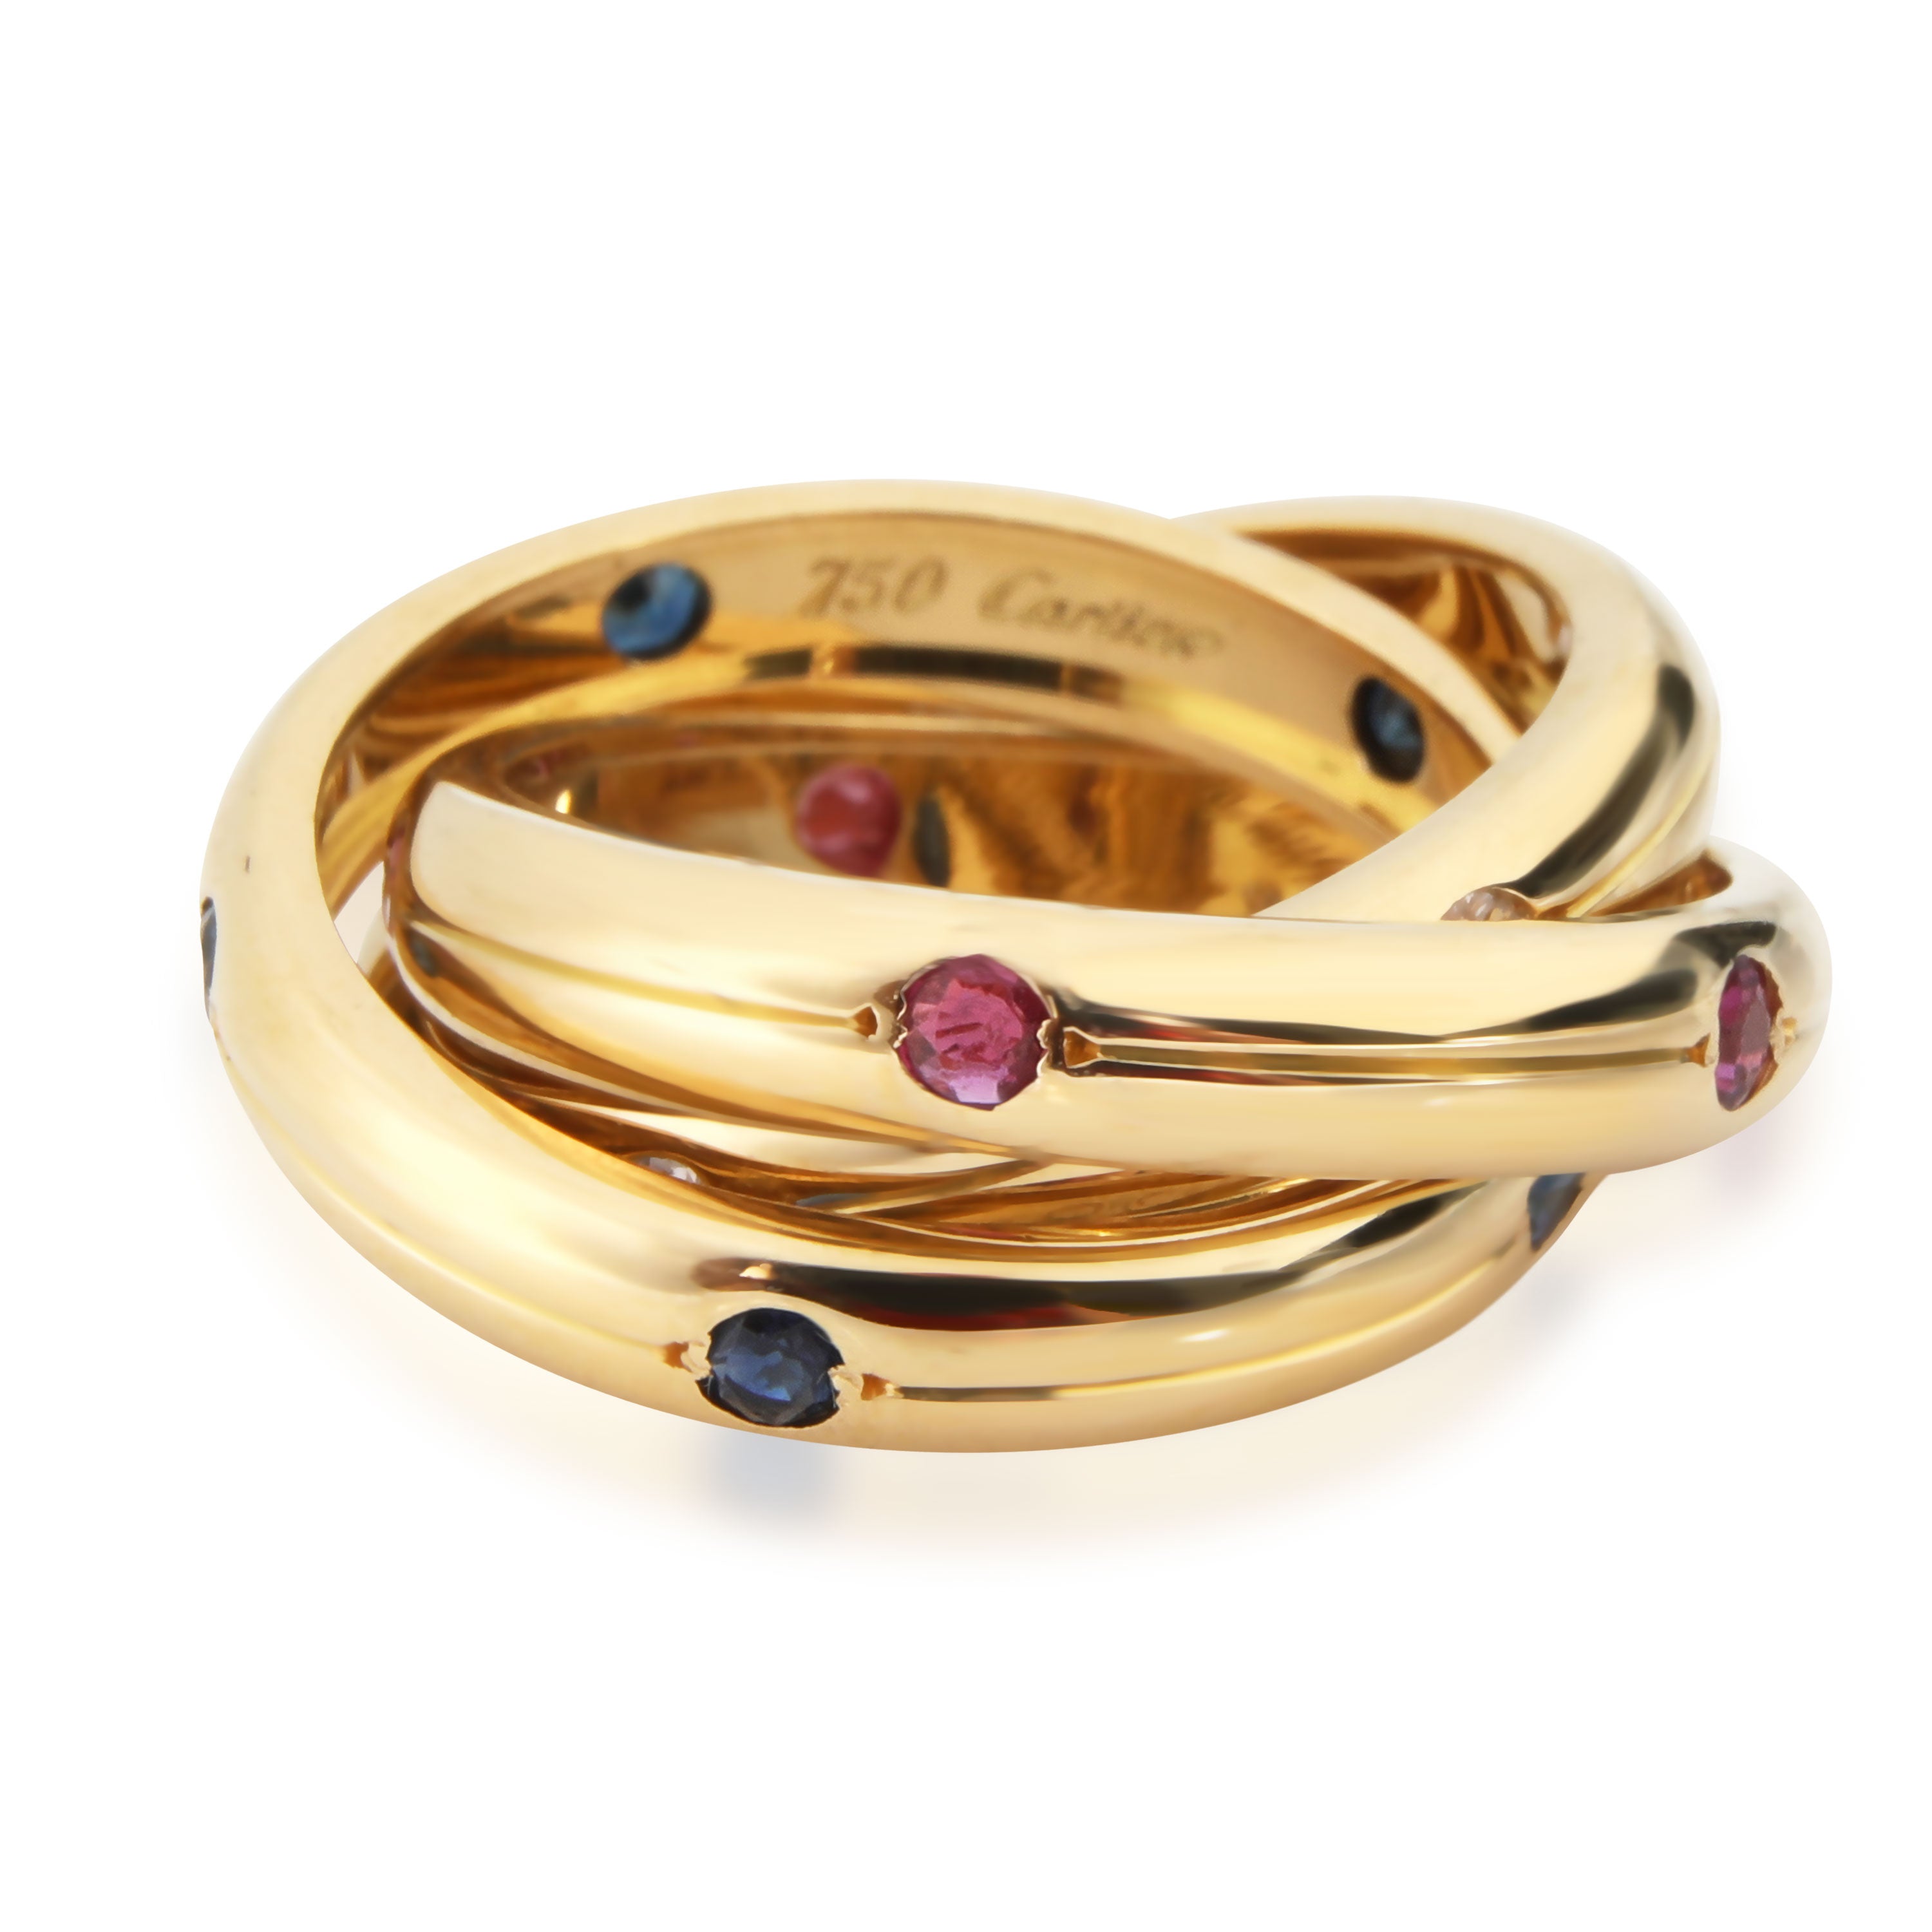 Cartier Trinity Diamond, Sapphire, Ruby Ring in 18K Yellow Gold